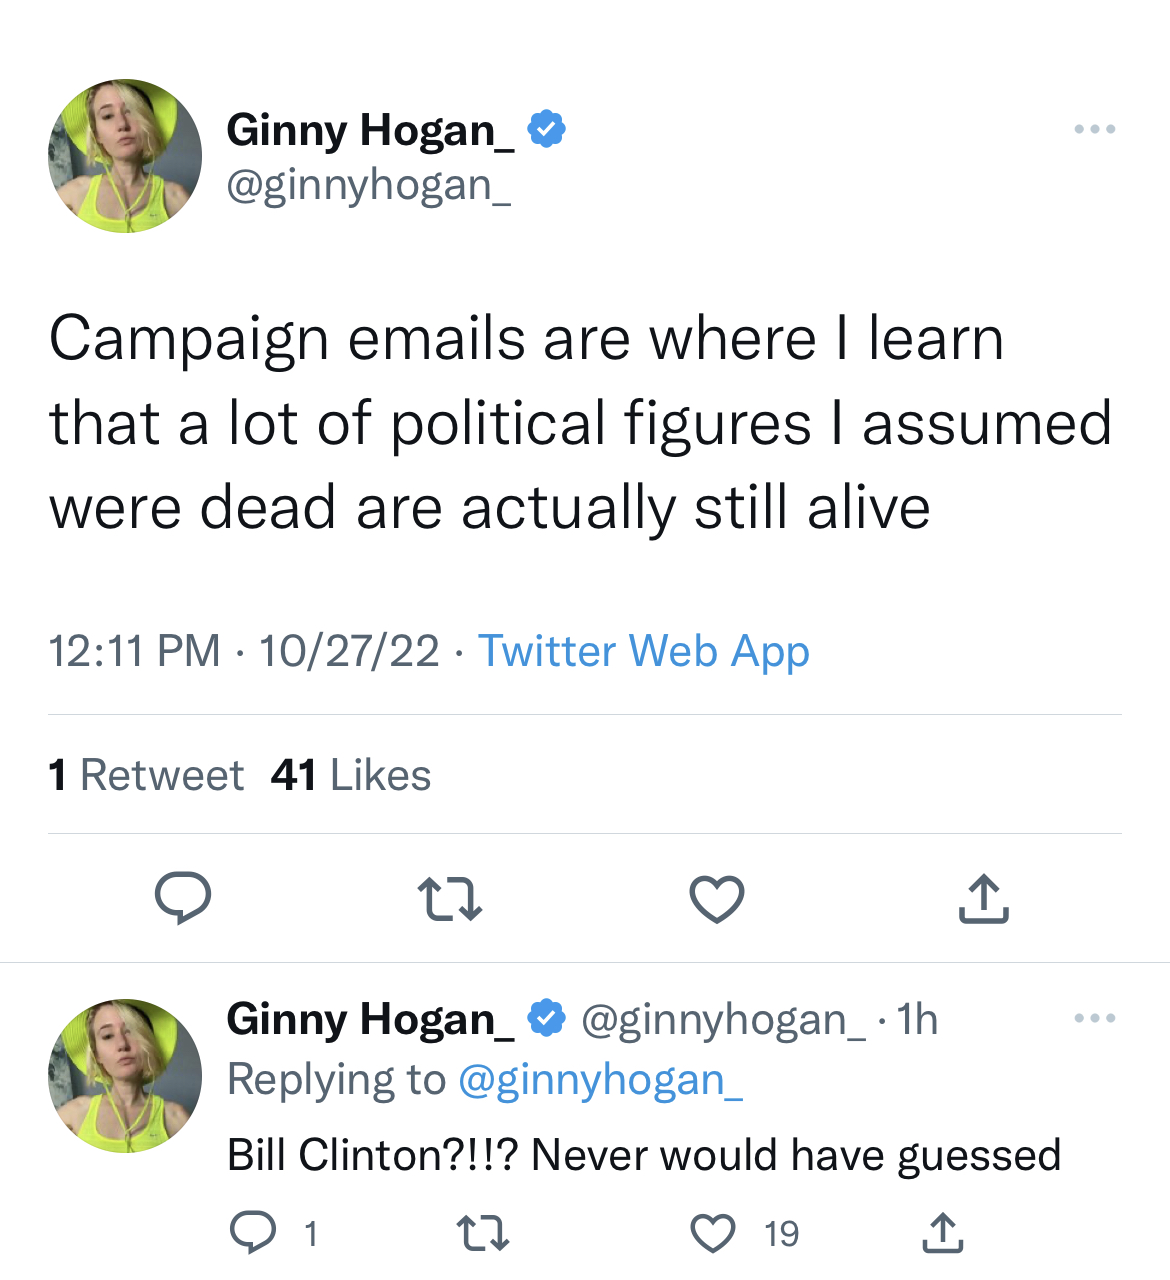 Tweets Roasting Celebs - ben shapiro tweets - Ginny Hogan_ Campaign emails are where I learn that a lot of political figures I assumed were dead are actually still alive 102722 Twitter Web App 1 Retweet 41 22 Ginny Hogan_ 1h Bill Clinton?!!? Never would h